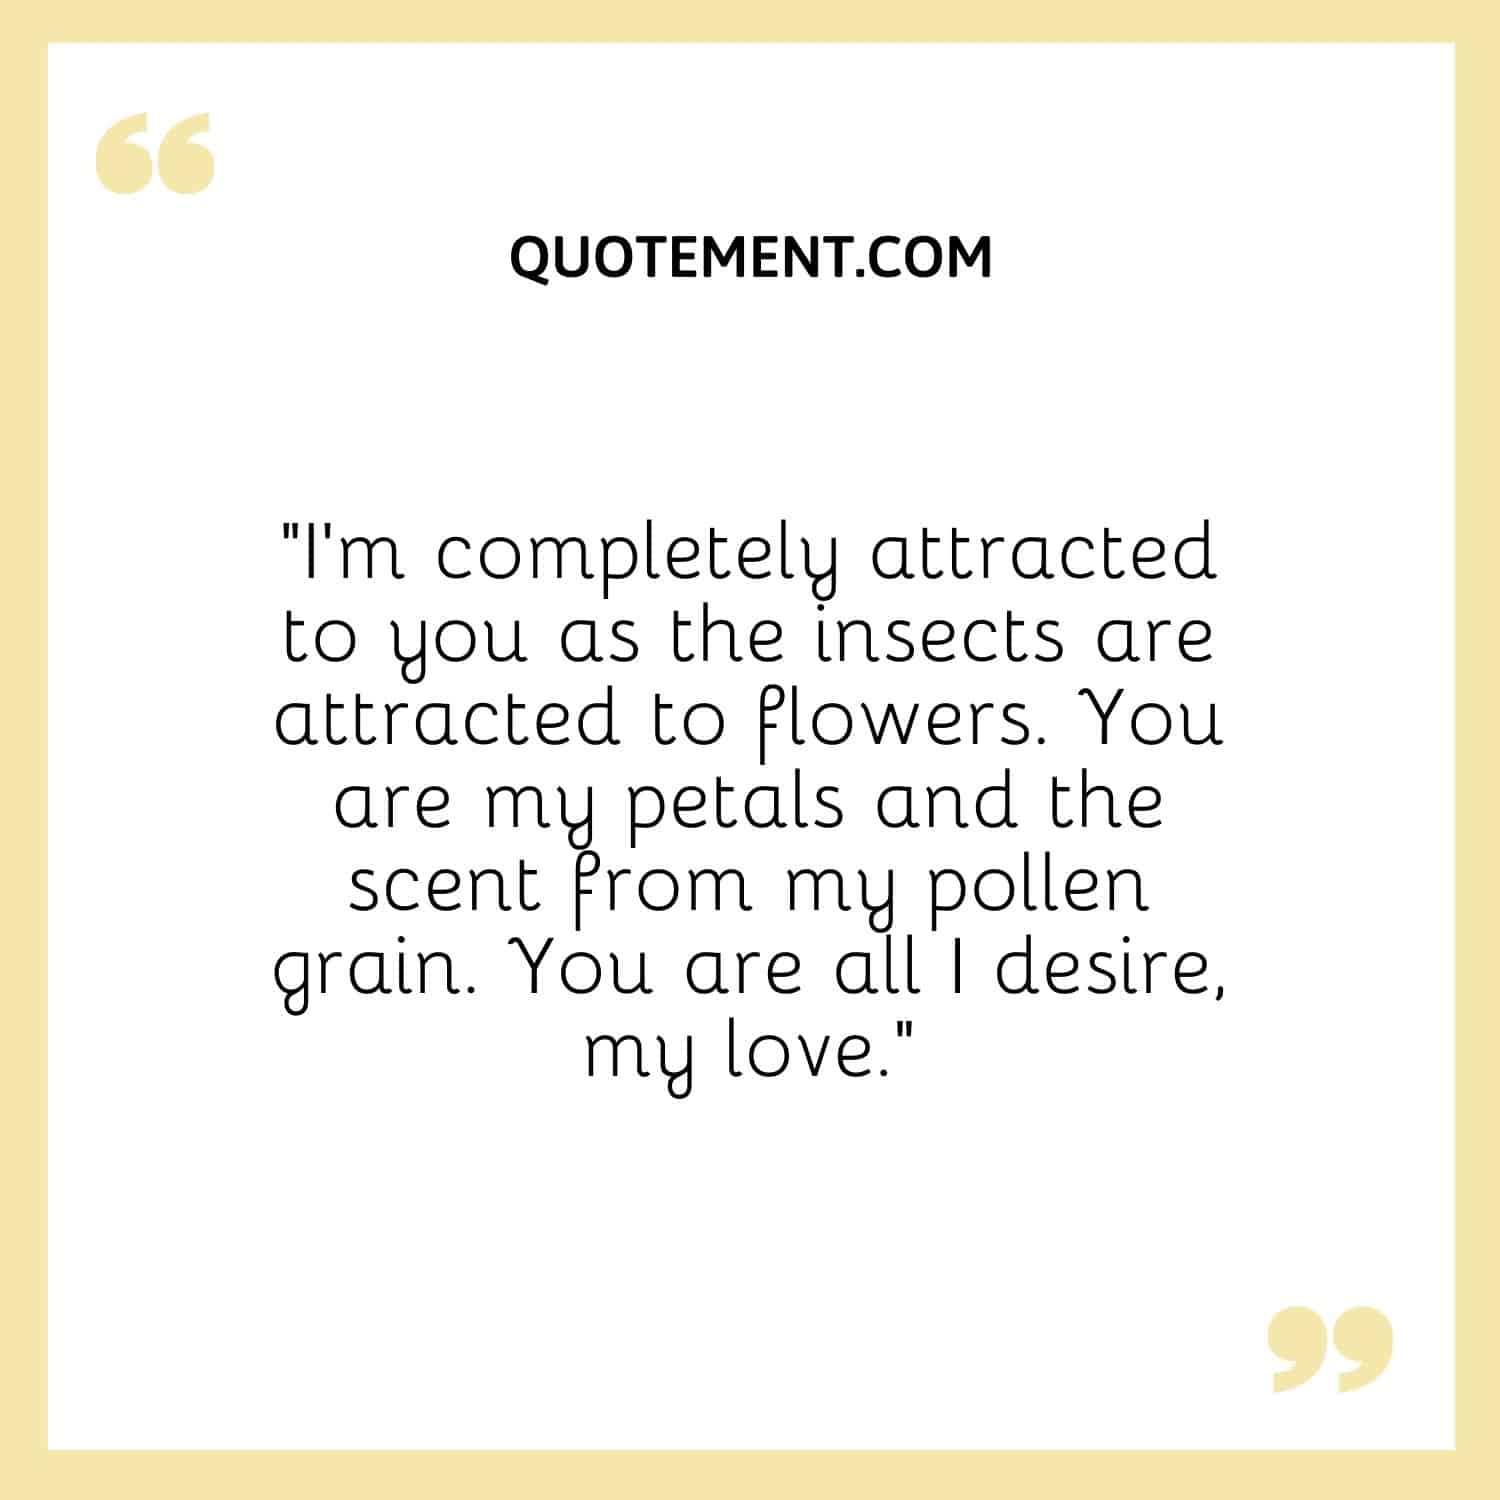 “I’m completely attracted to you as the insects are attracted to flowers. You are my petals and the scent from my pollen grain. You are all I desire, my love.”